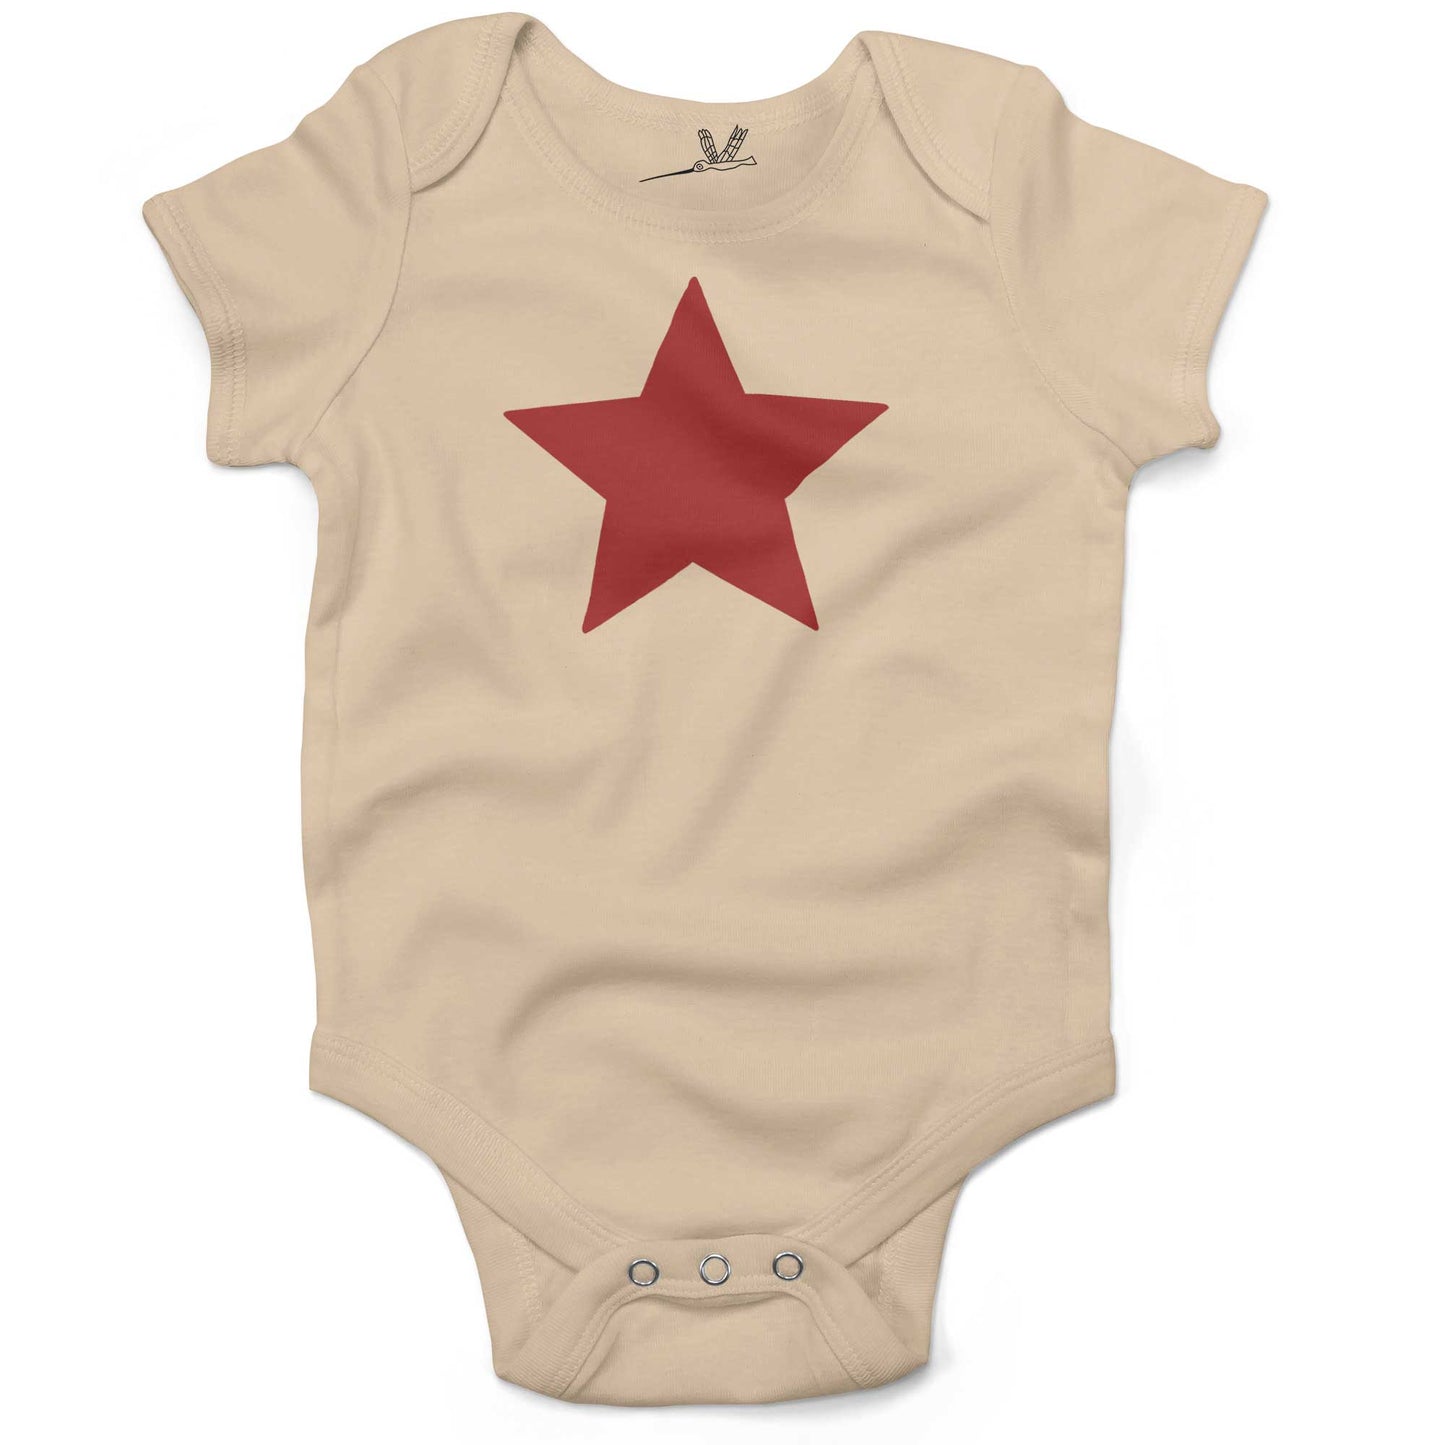 Five Point Star Infant Bodysuit-Organic Natural-Red Star